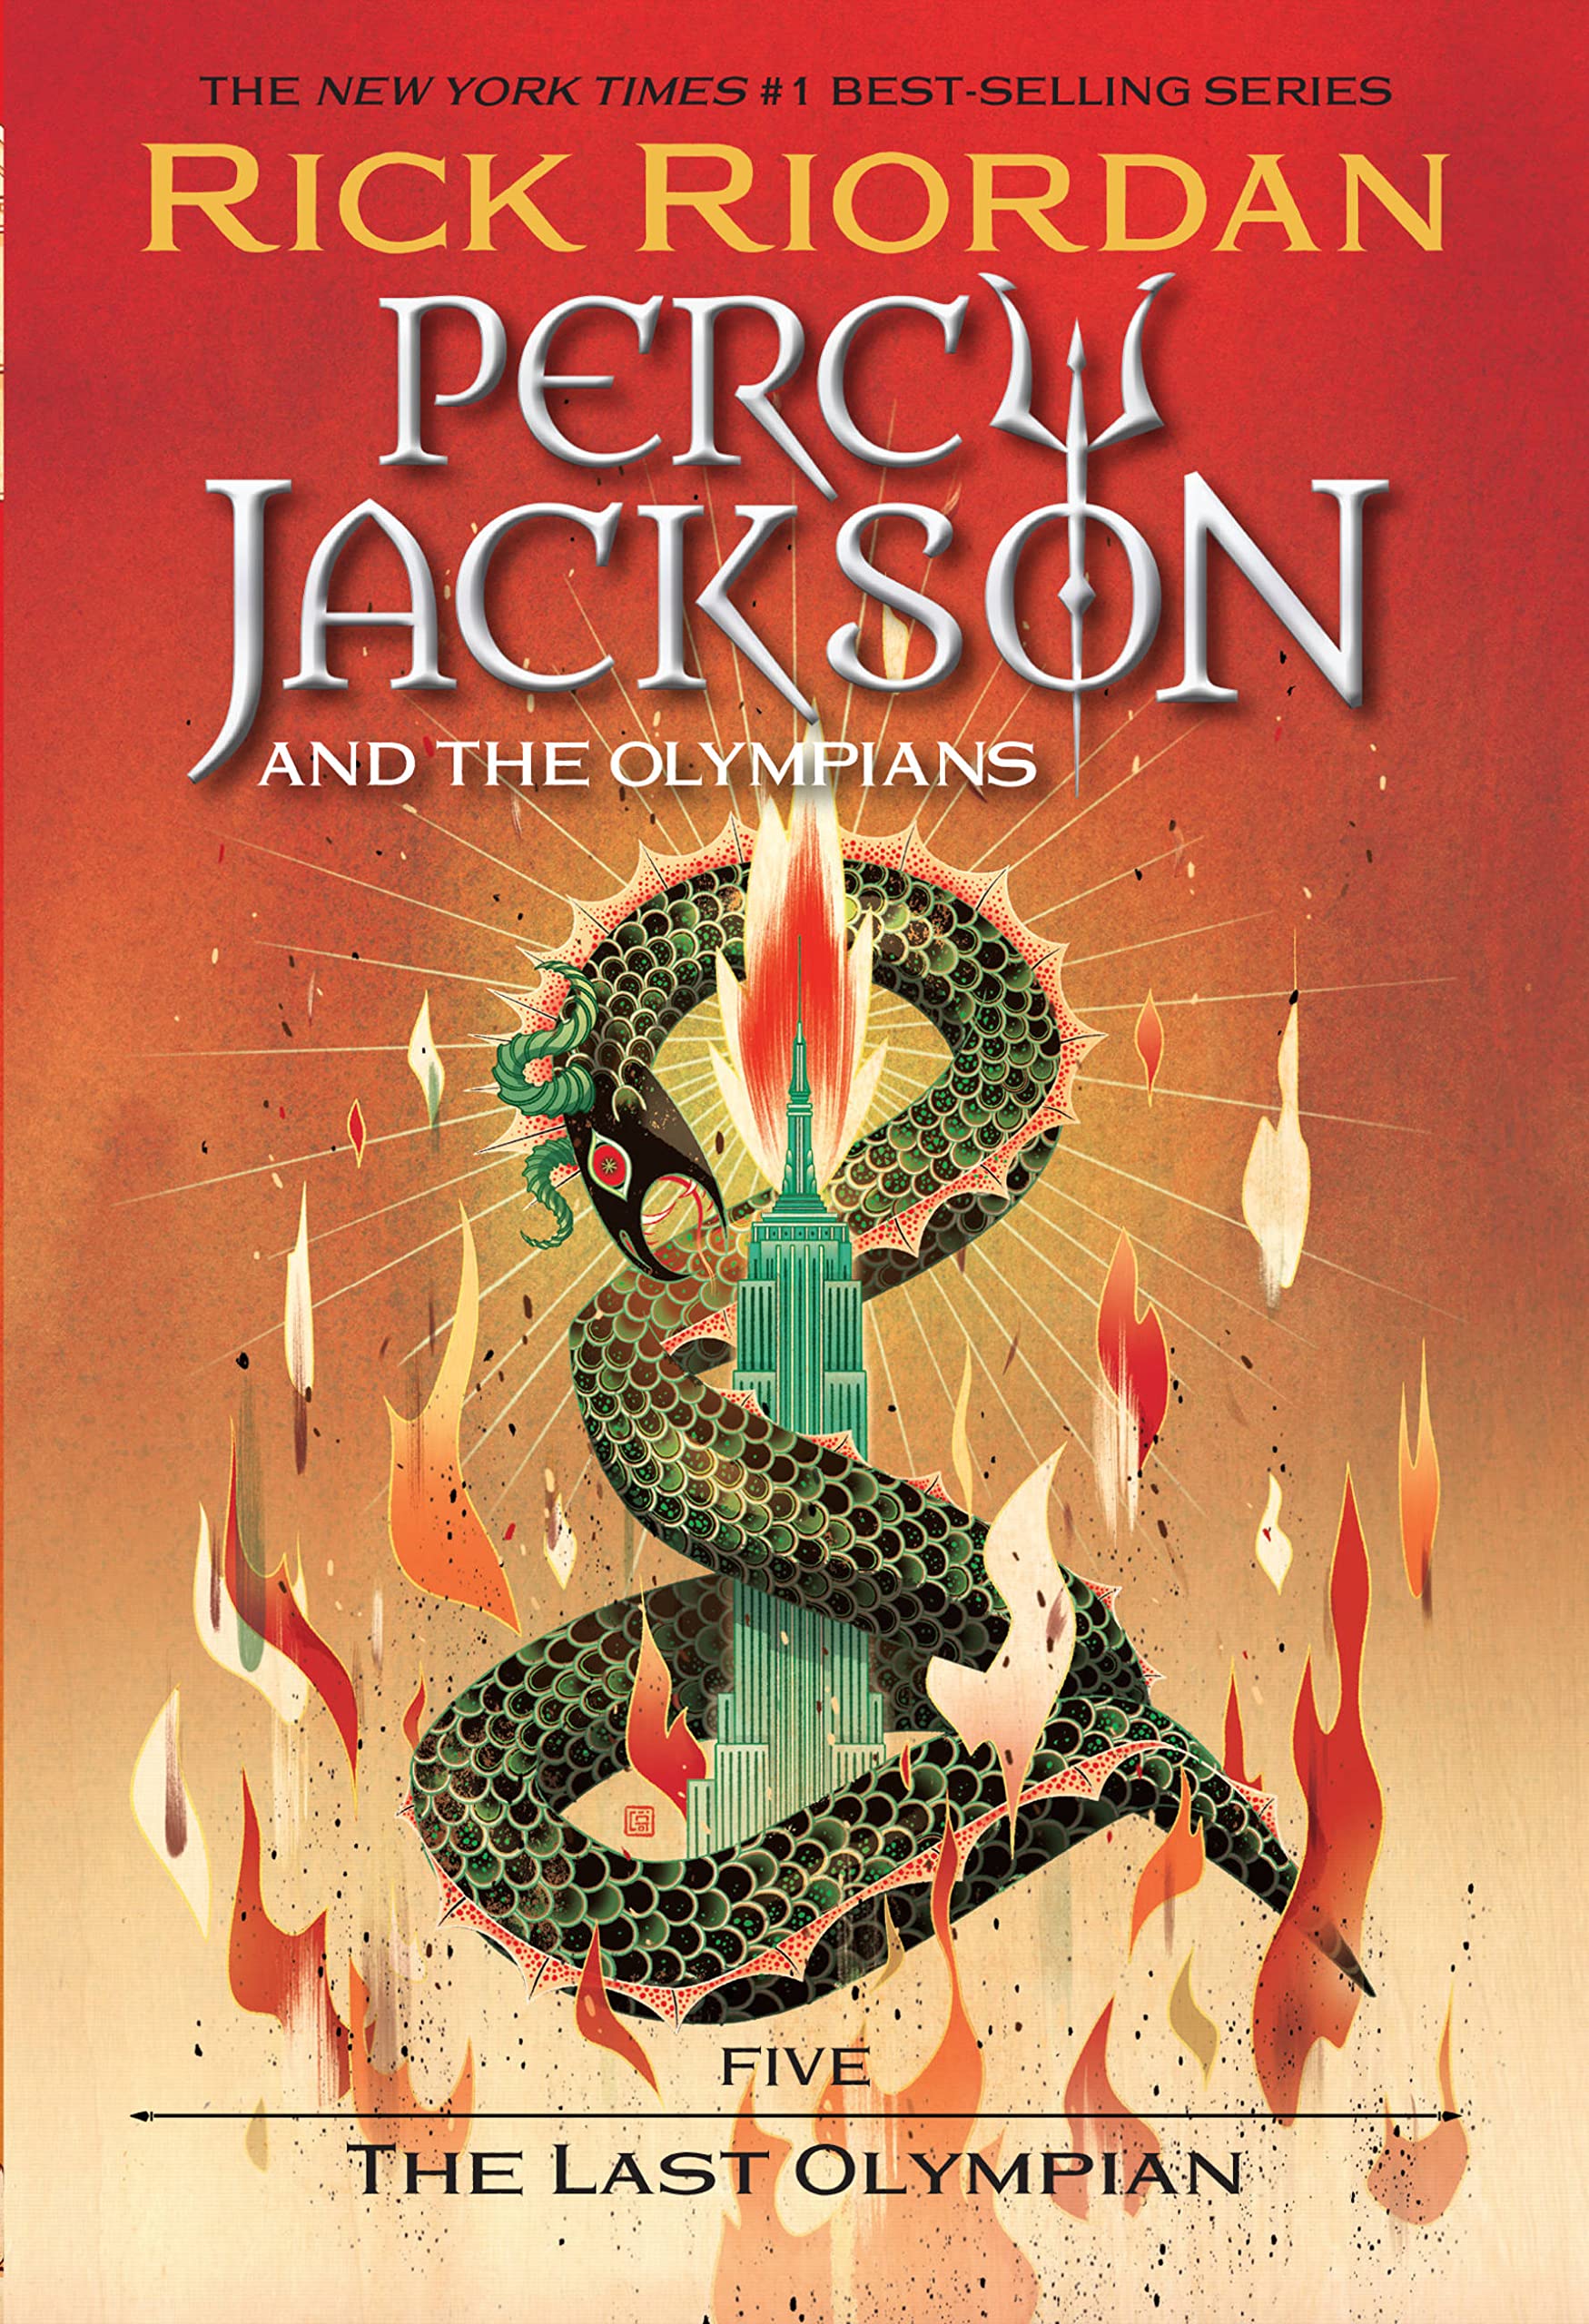 Percy Jackson and the Olympians: Battle of the Labyrinth: The Graphic  Novel, The-Percy Jackson and the Olympians (Percy Jackson & the Olympians  #4)